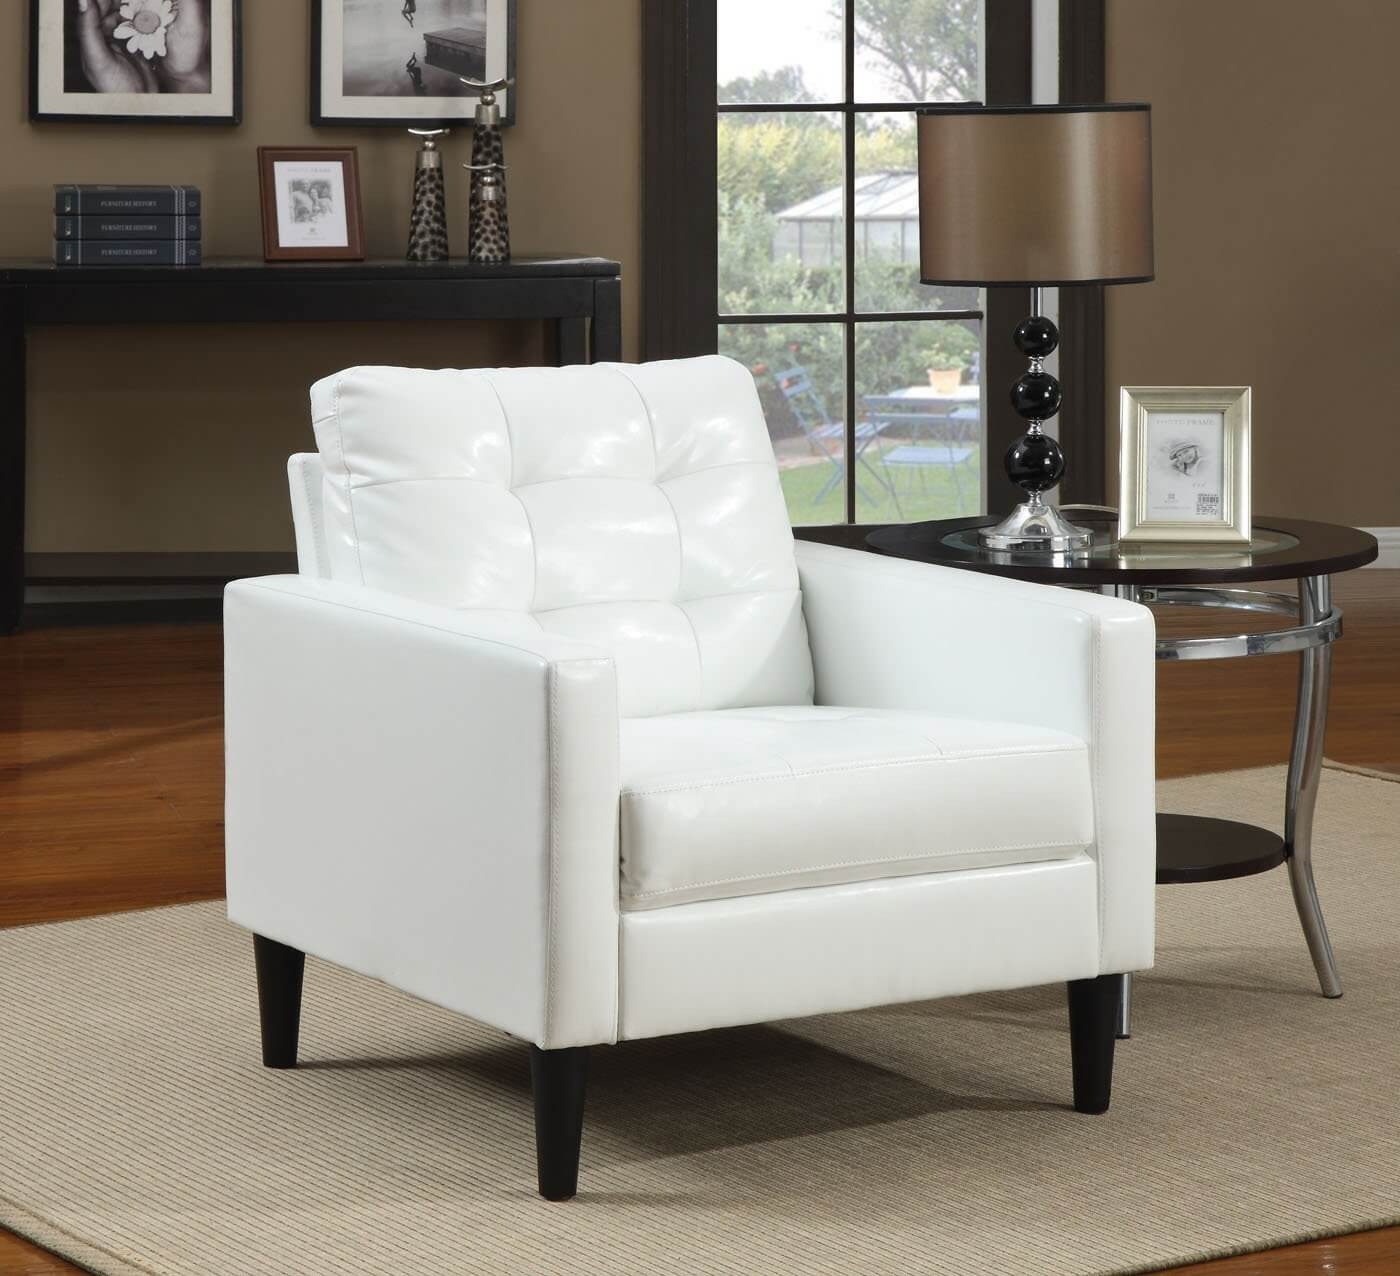 Modern White Living Room Furniture
 37 White Modern Accent Chairs for the Living Room